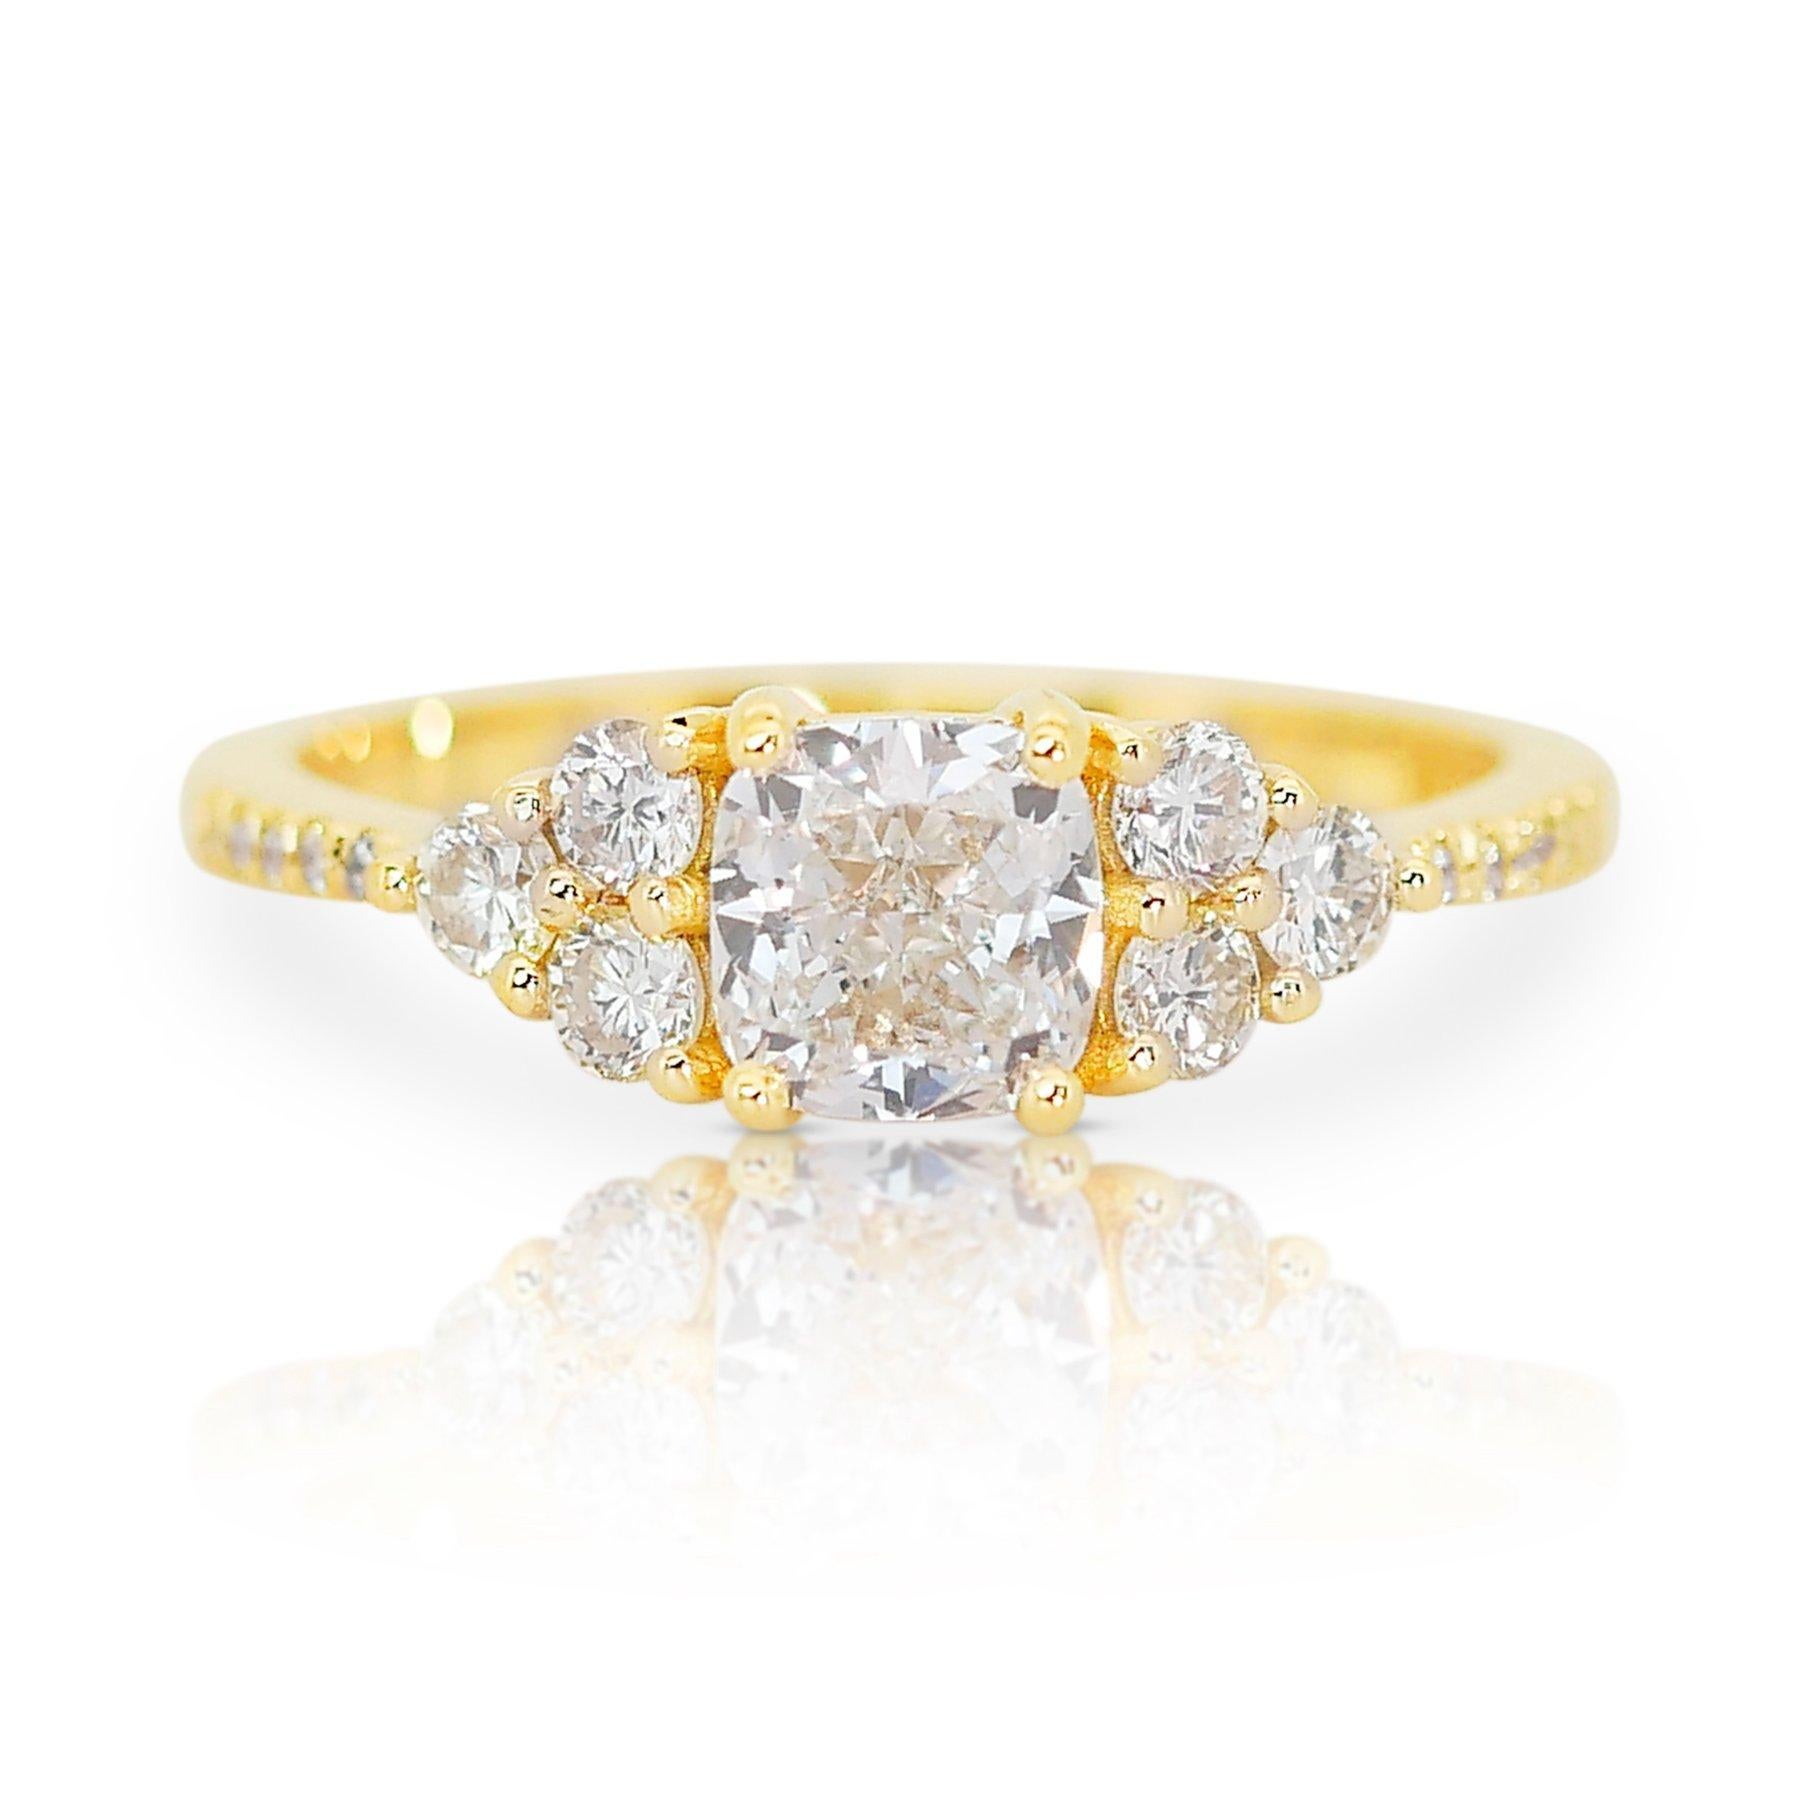 Lustrous 1.32ct Diamond Pave Ring in 18k Yellow Gold - GIA Certified For Sale 3